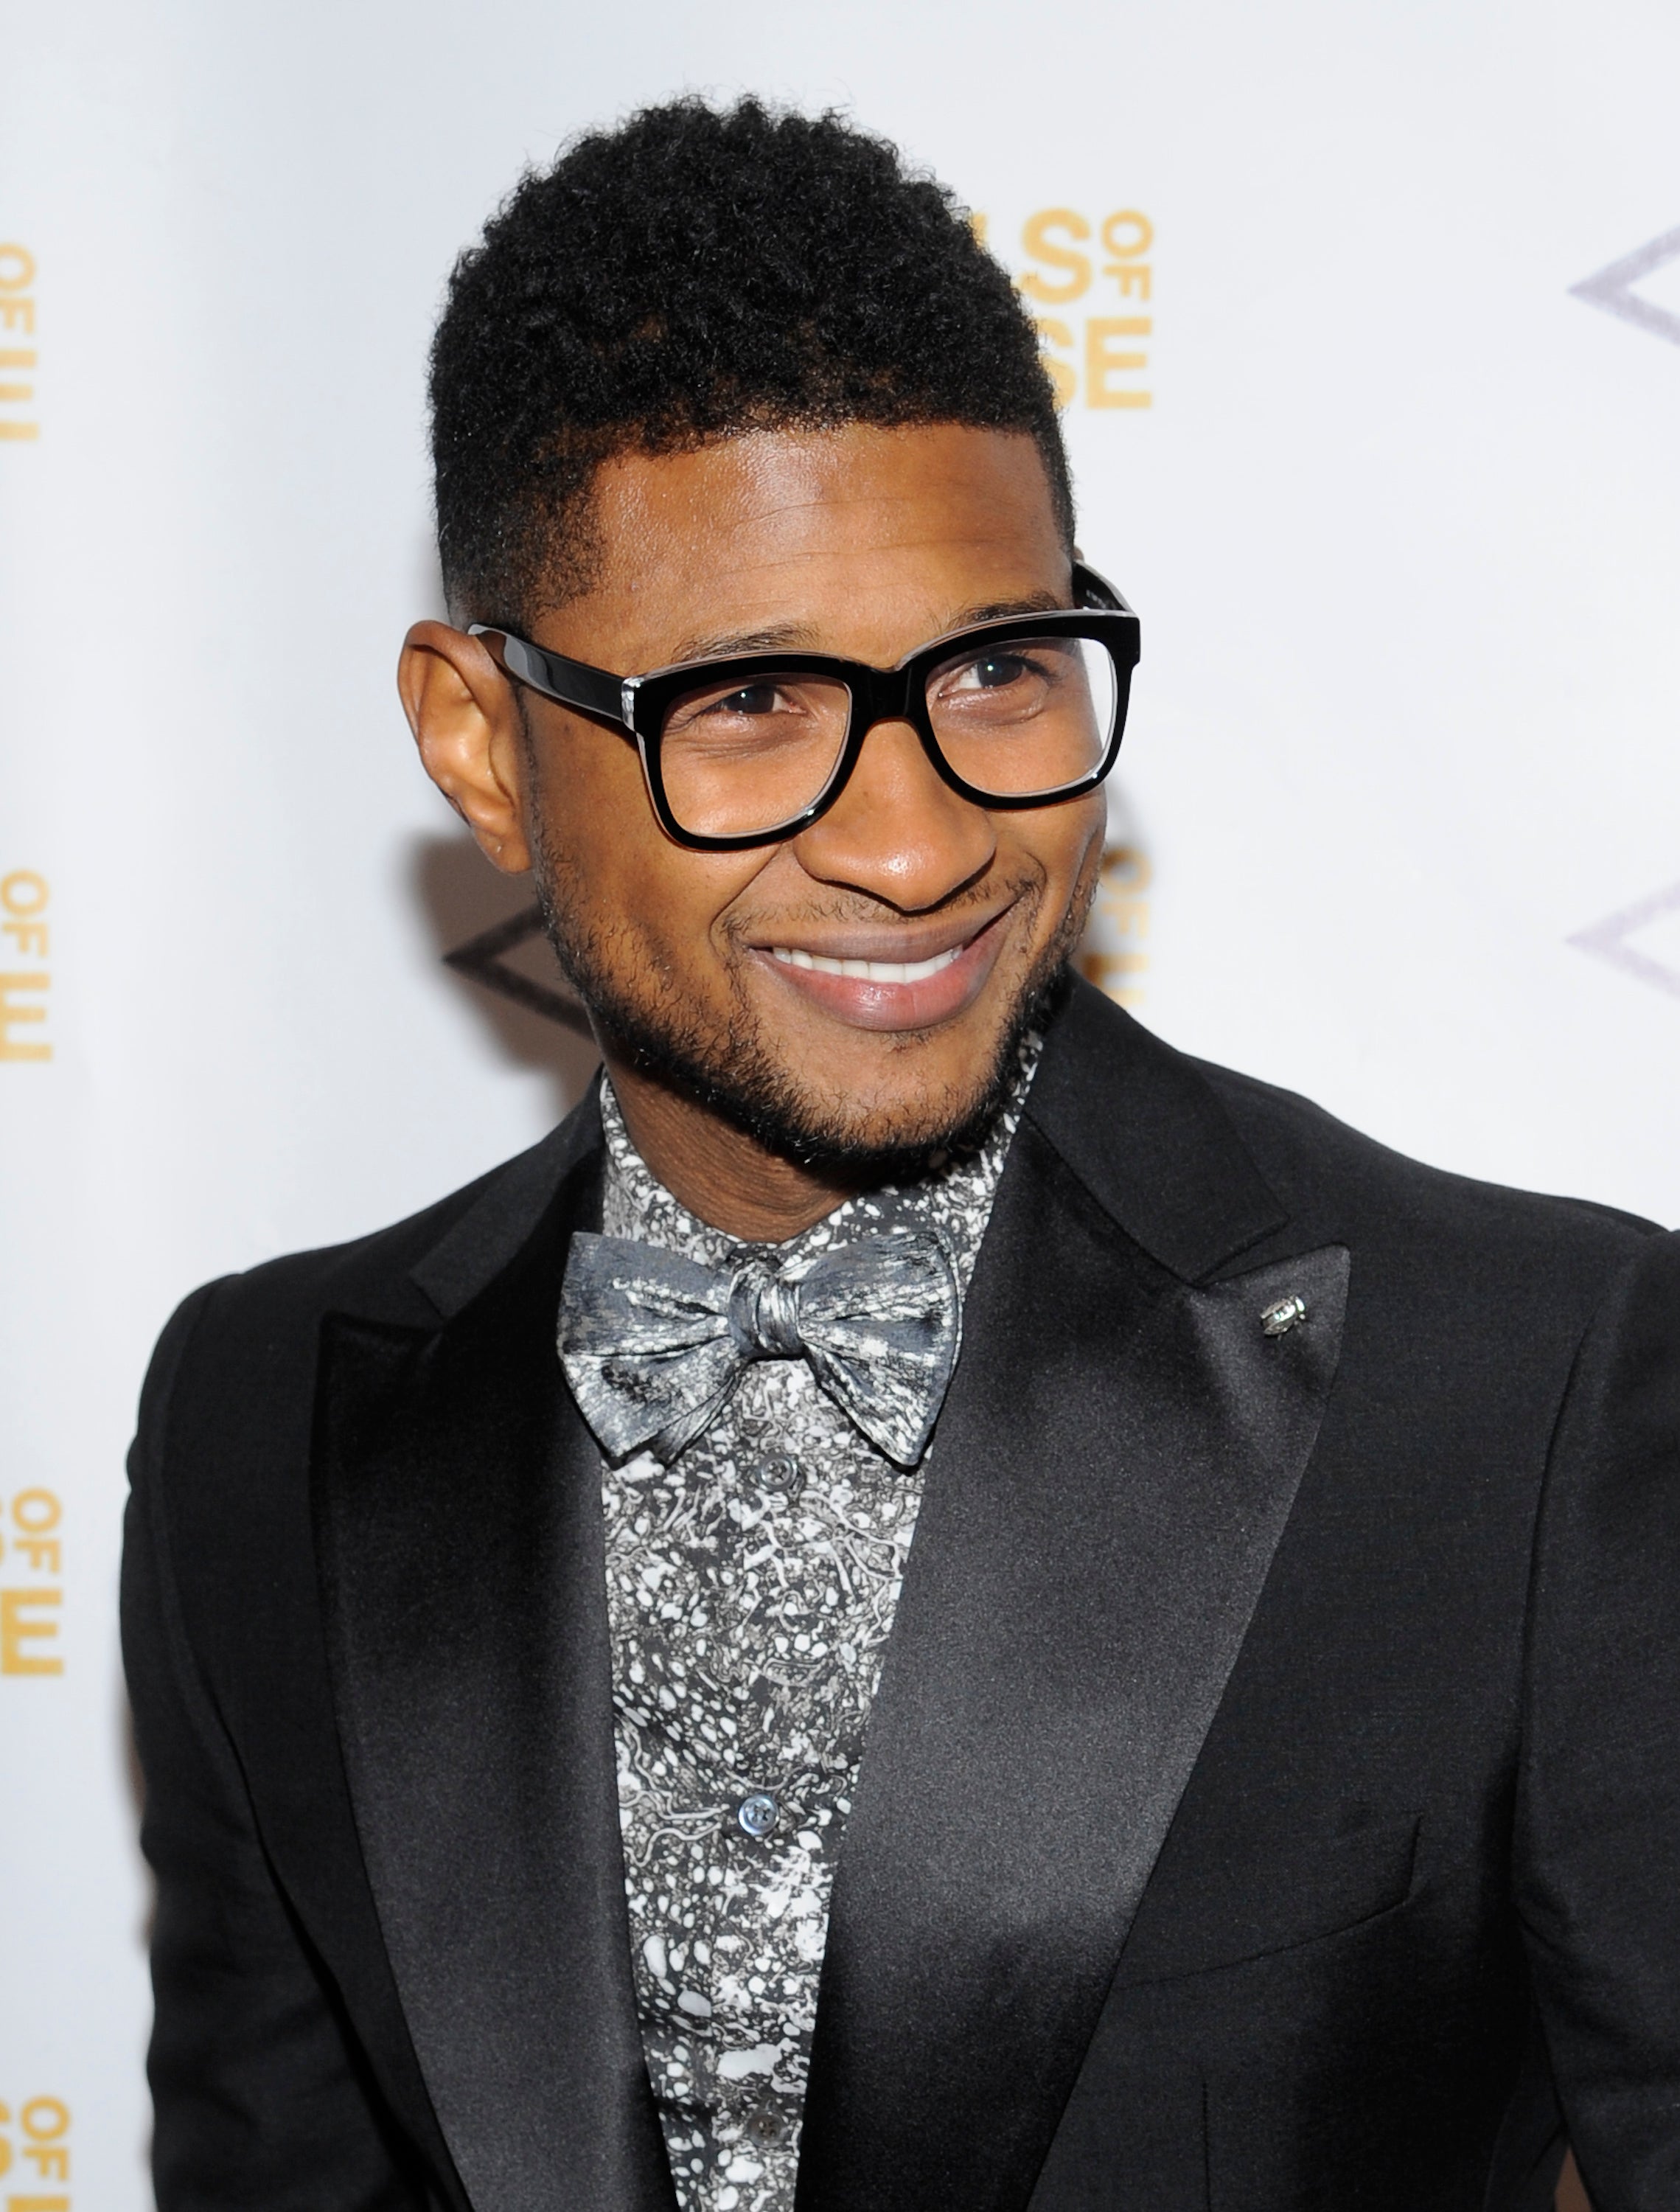 Usher Lands New Gig on The Voice